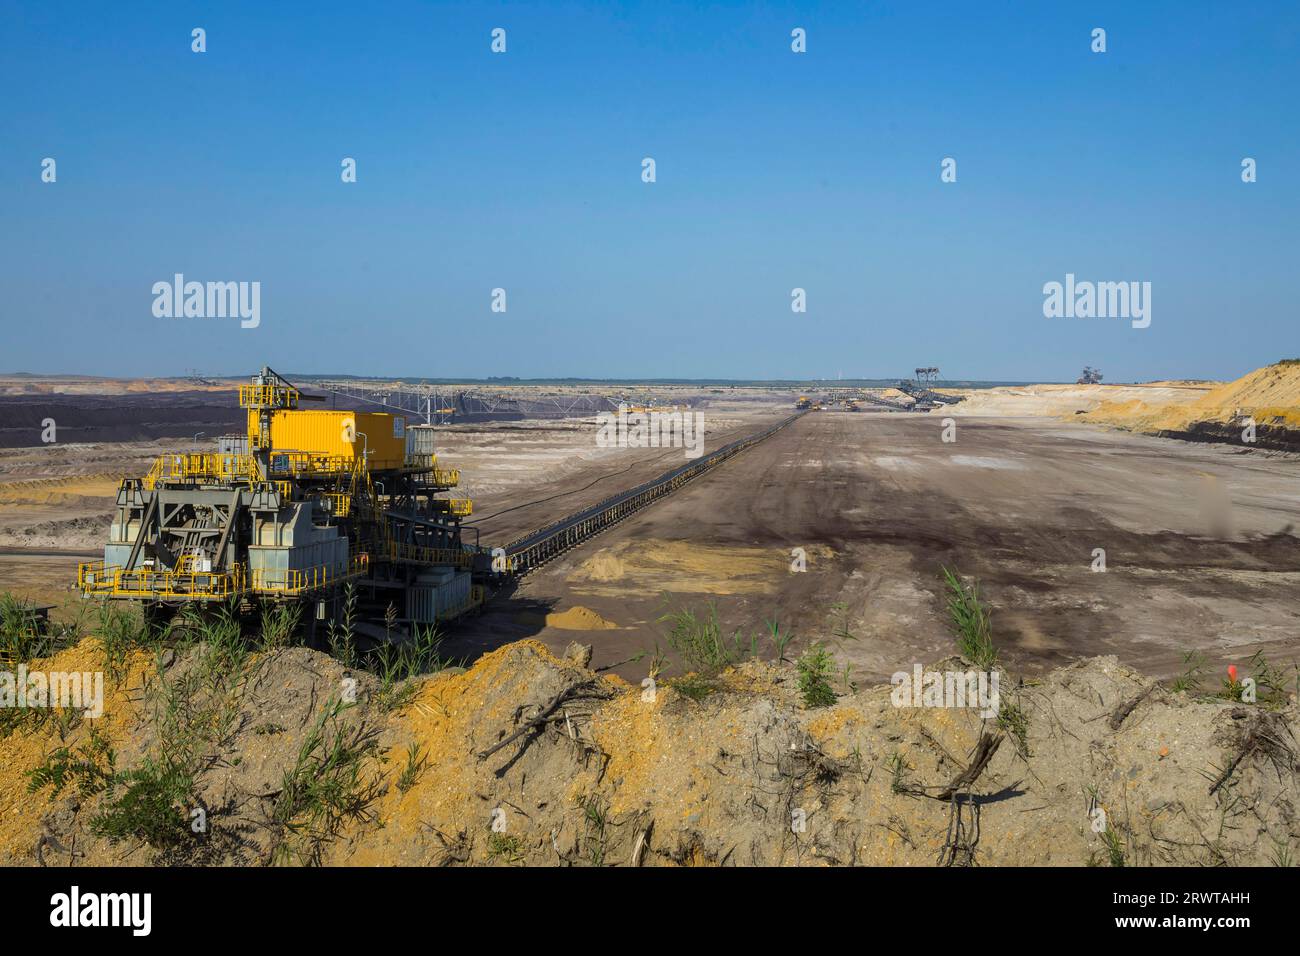 The Welzow-Süd opencast mine is an opencast lignite mine in southern Lower Lusatia in the district of Spree-Neiße, operated by Lausitz Energie Bergbau Stock Photo